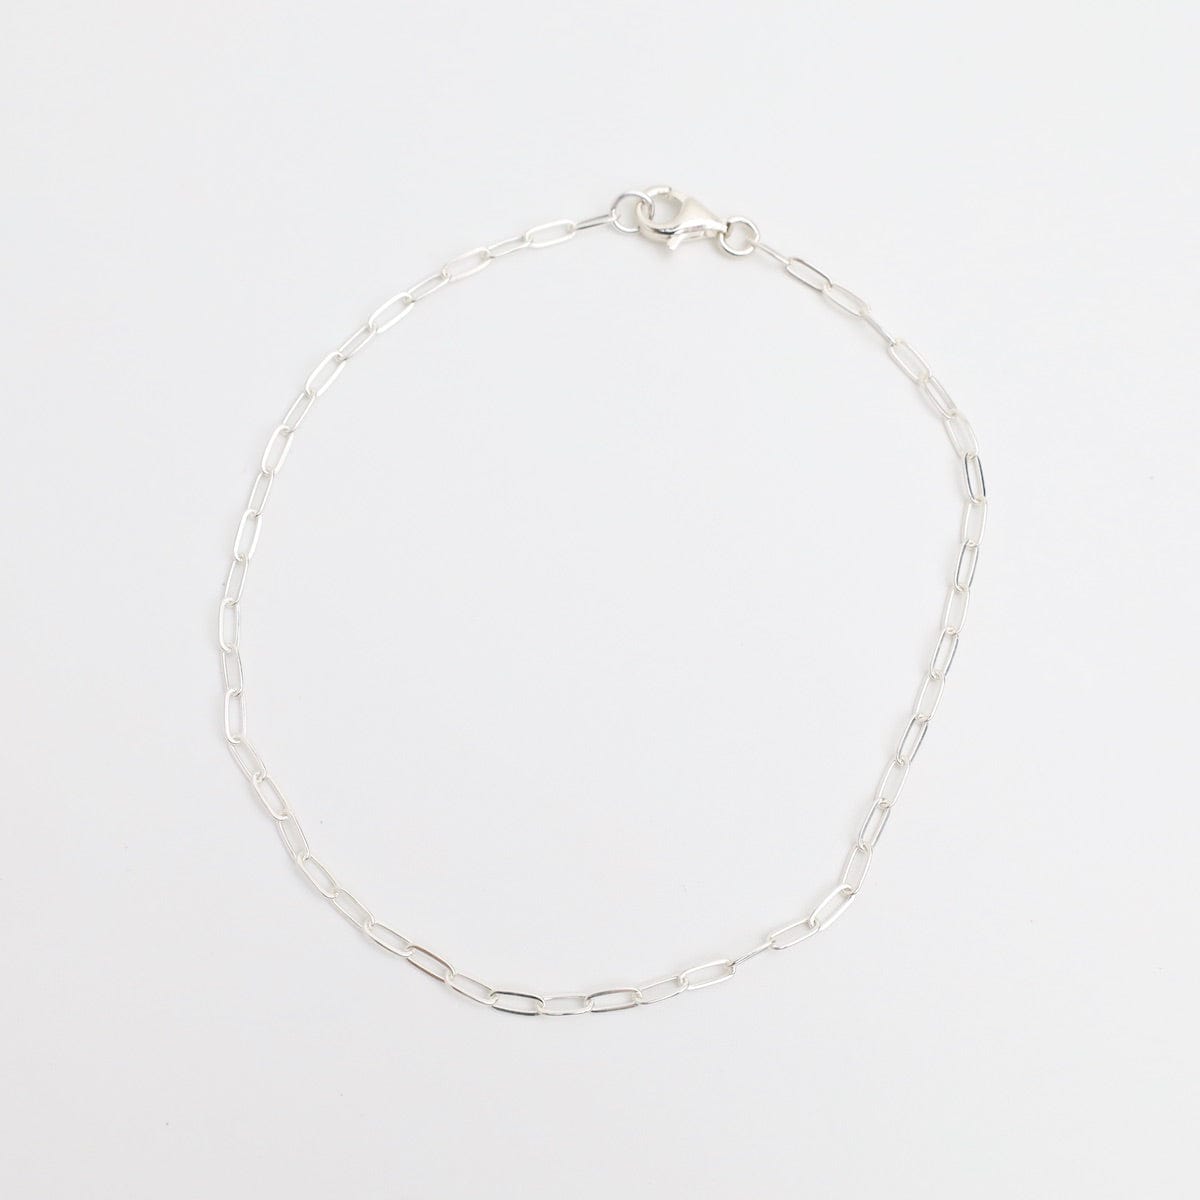 ANK 10" Sterling Silver Flat Drawn Cable Chain Anklet